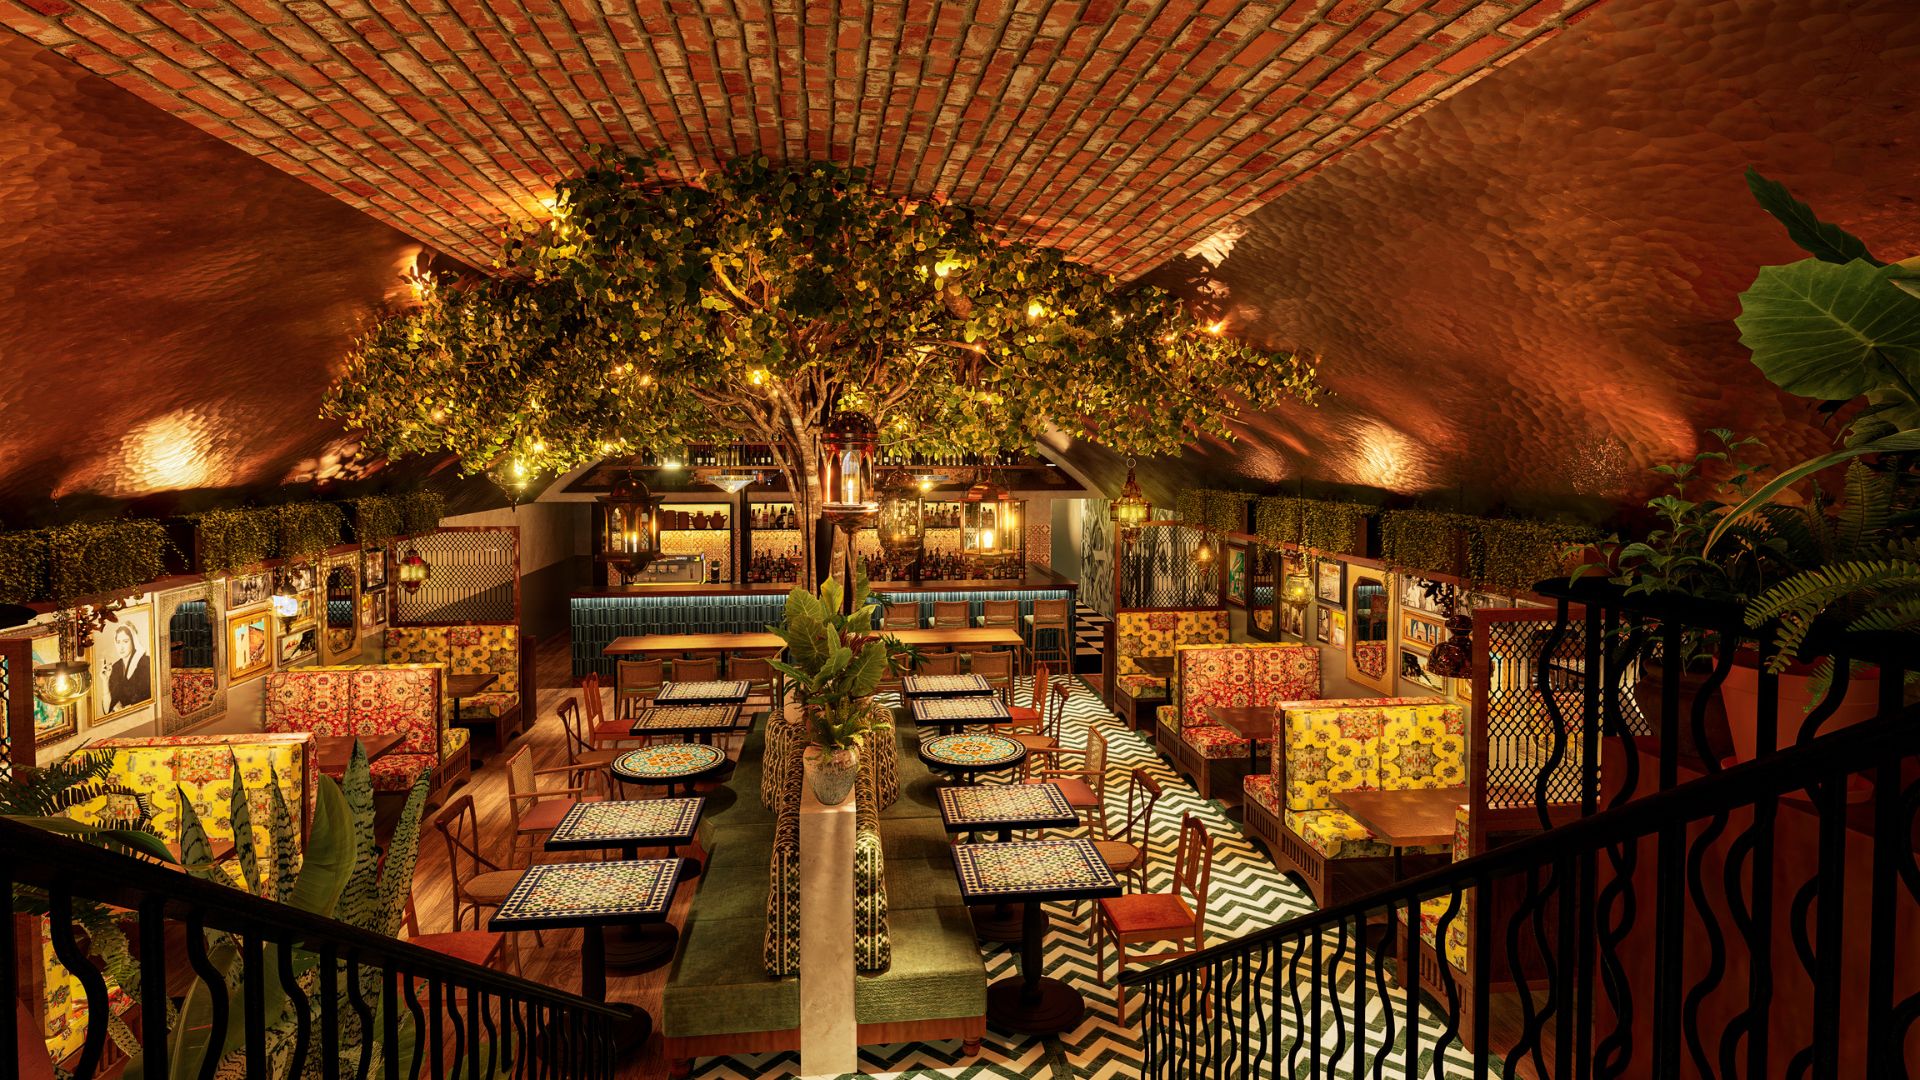 Comptoir Libanais opens its doors at London’s Southbank with an incredible new look.